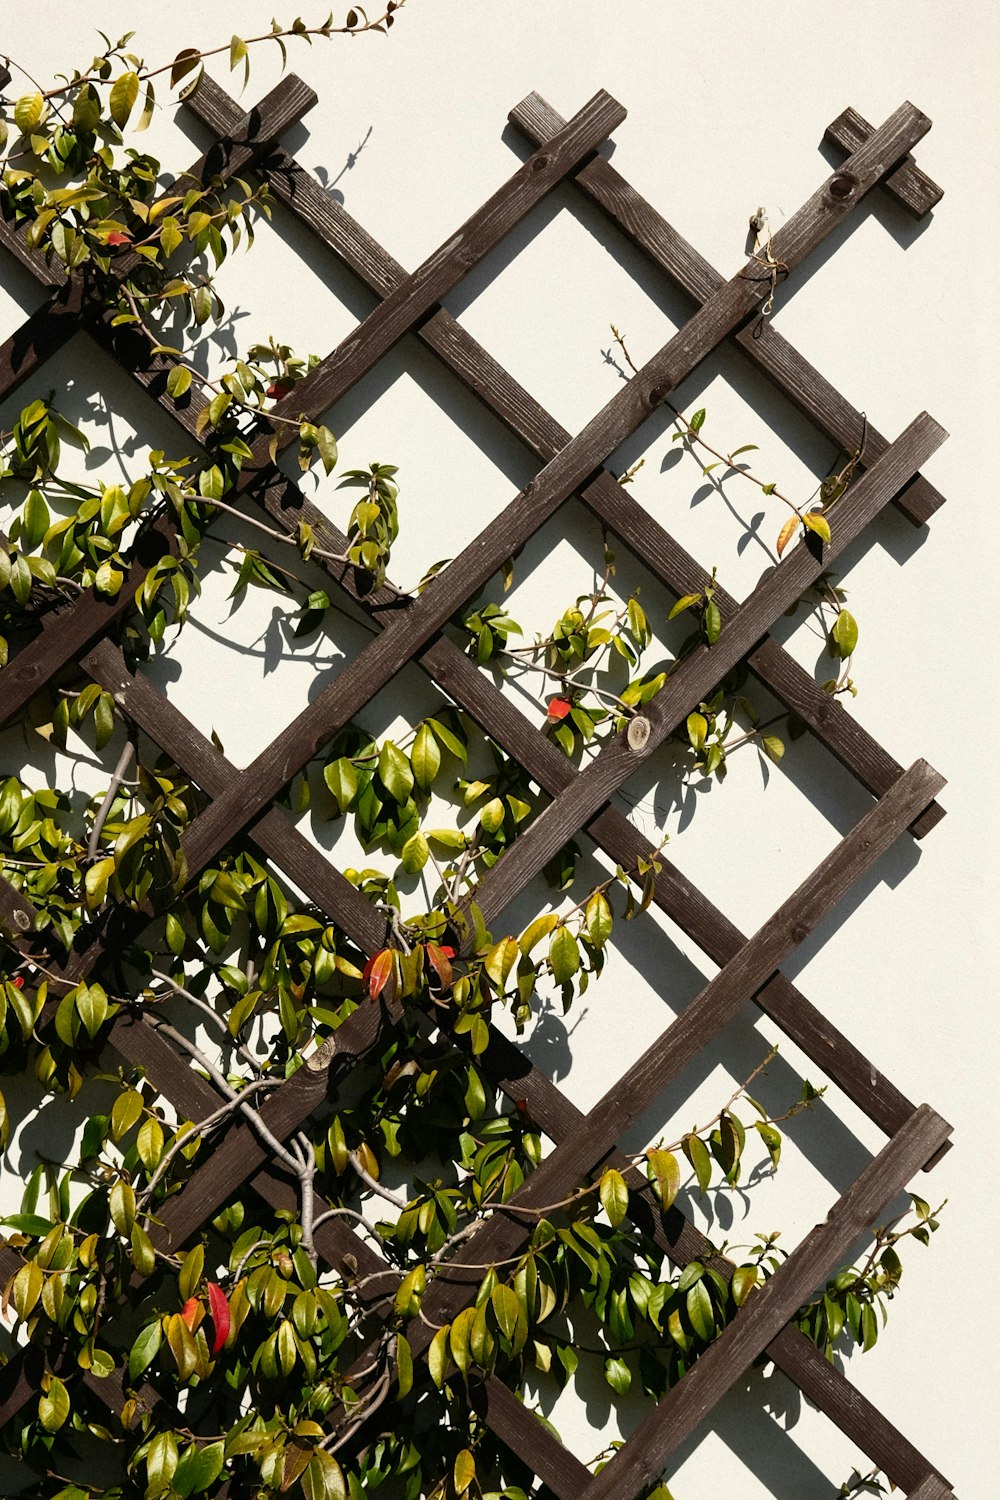 a close up of a wooden fence with a plant growing on it